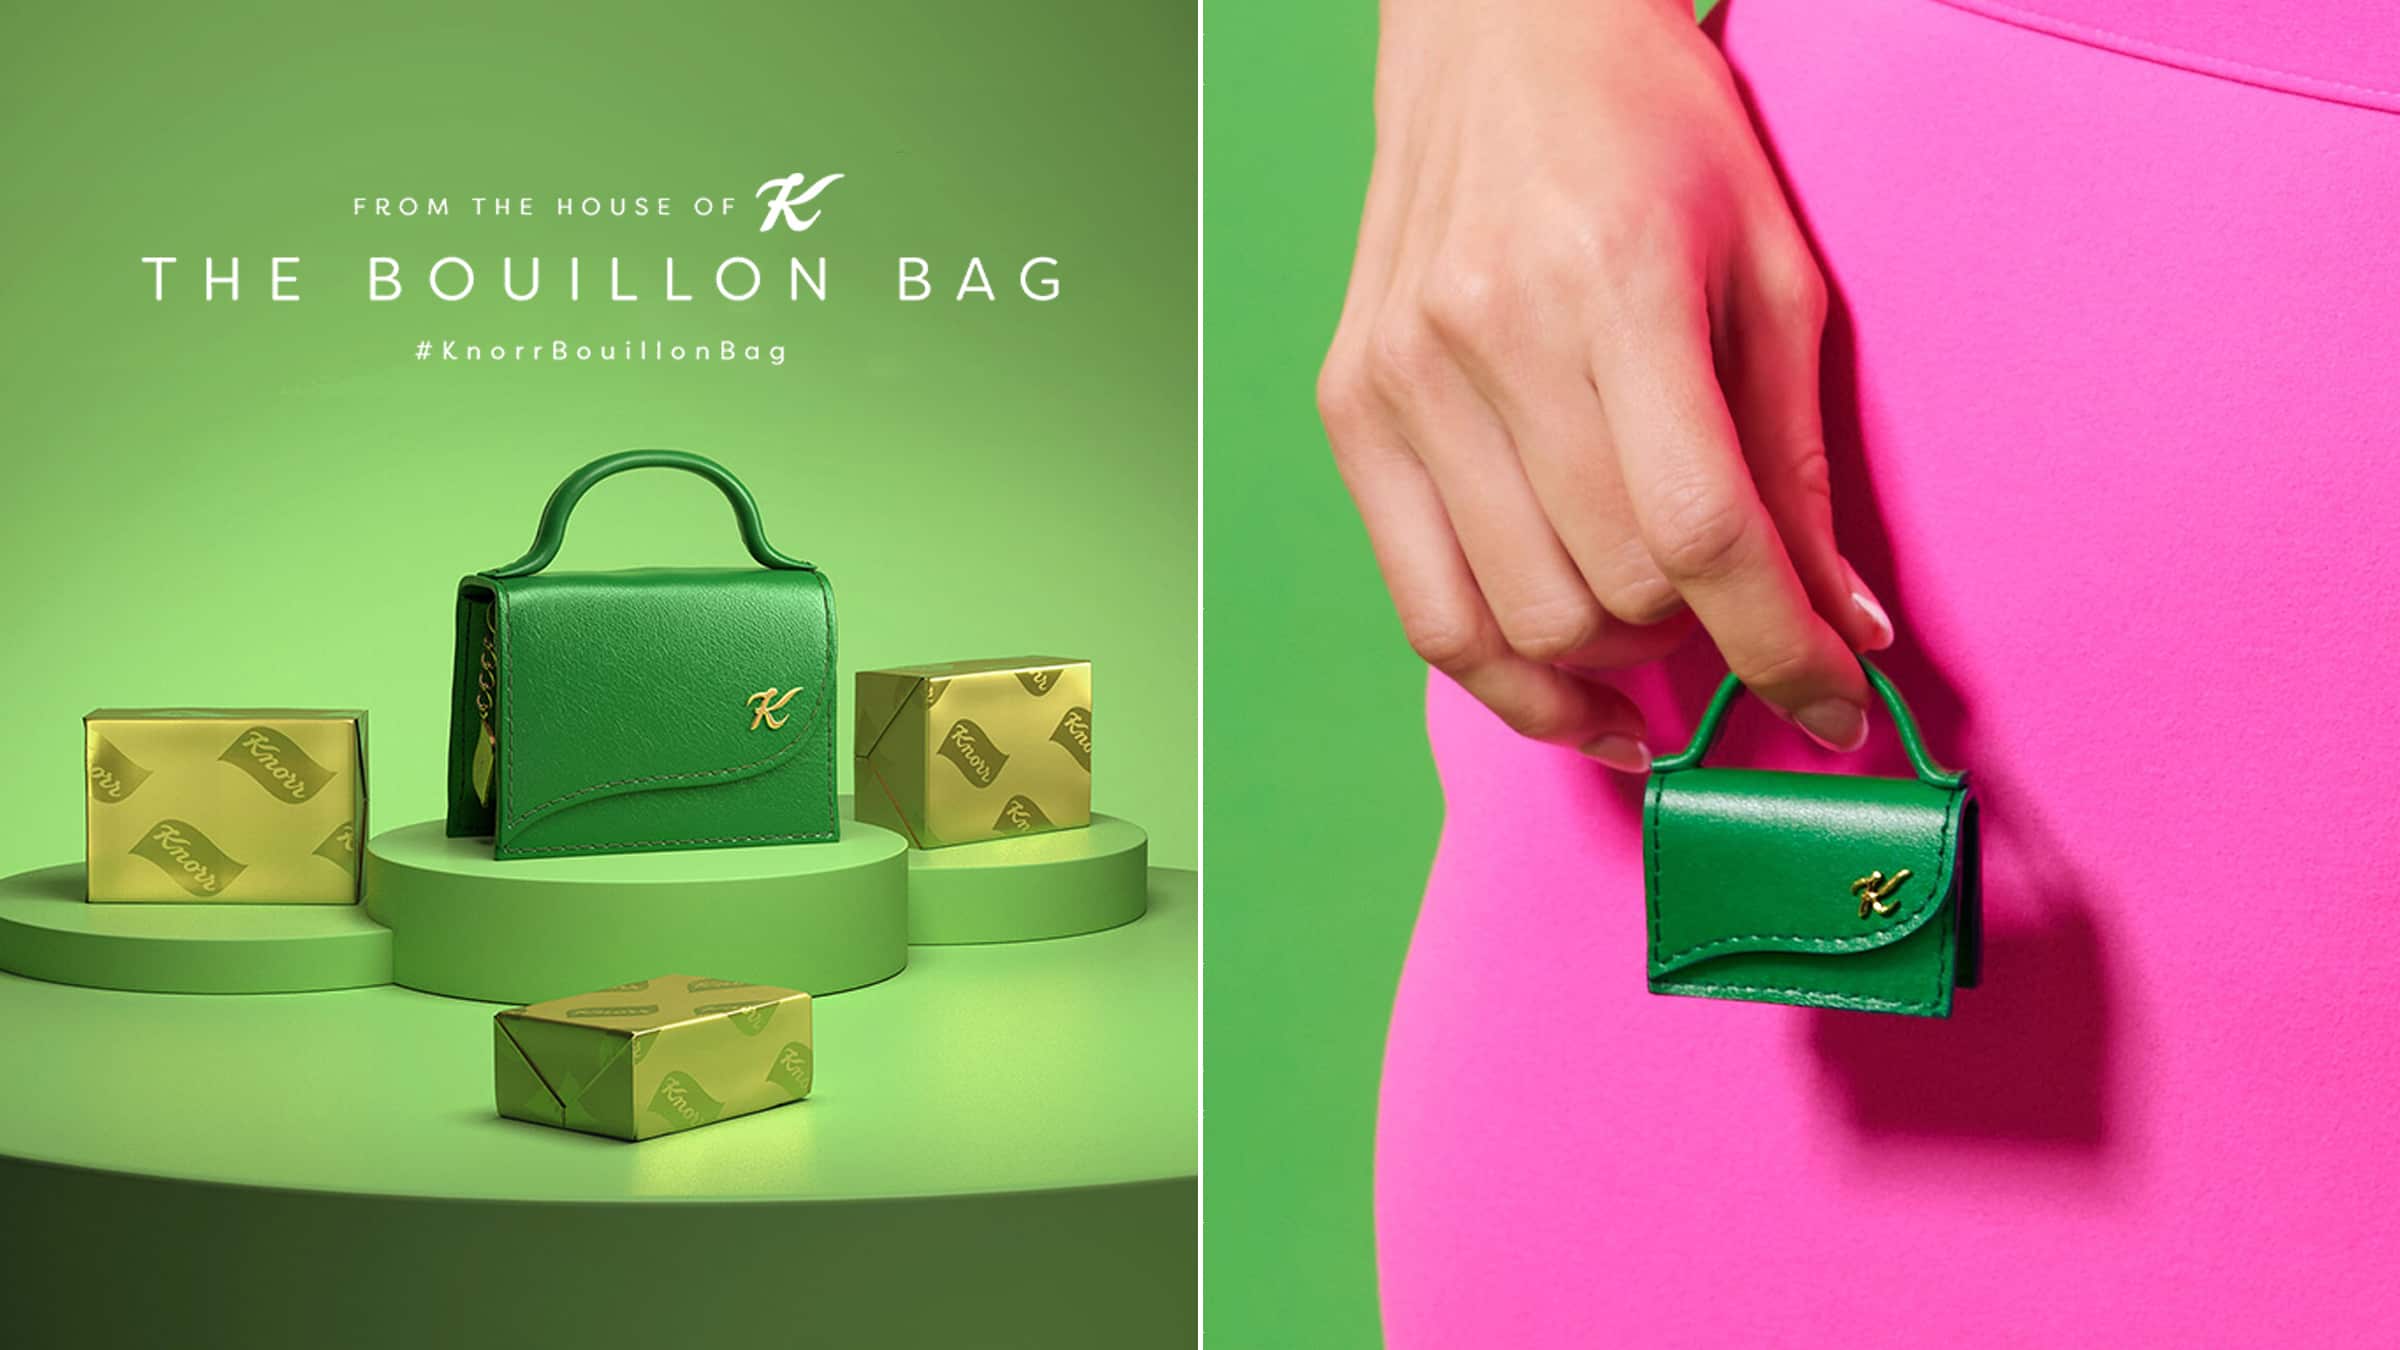 Absurdly Tiny Culinary Bags : Knorr's Mini Bouillon Bag